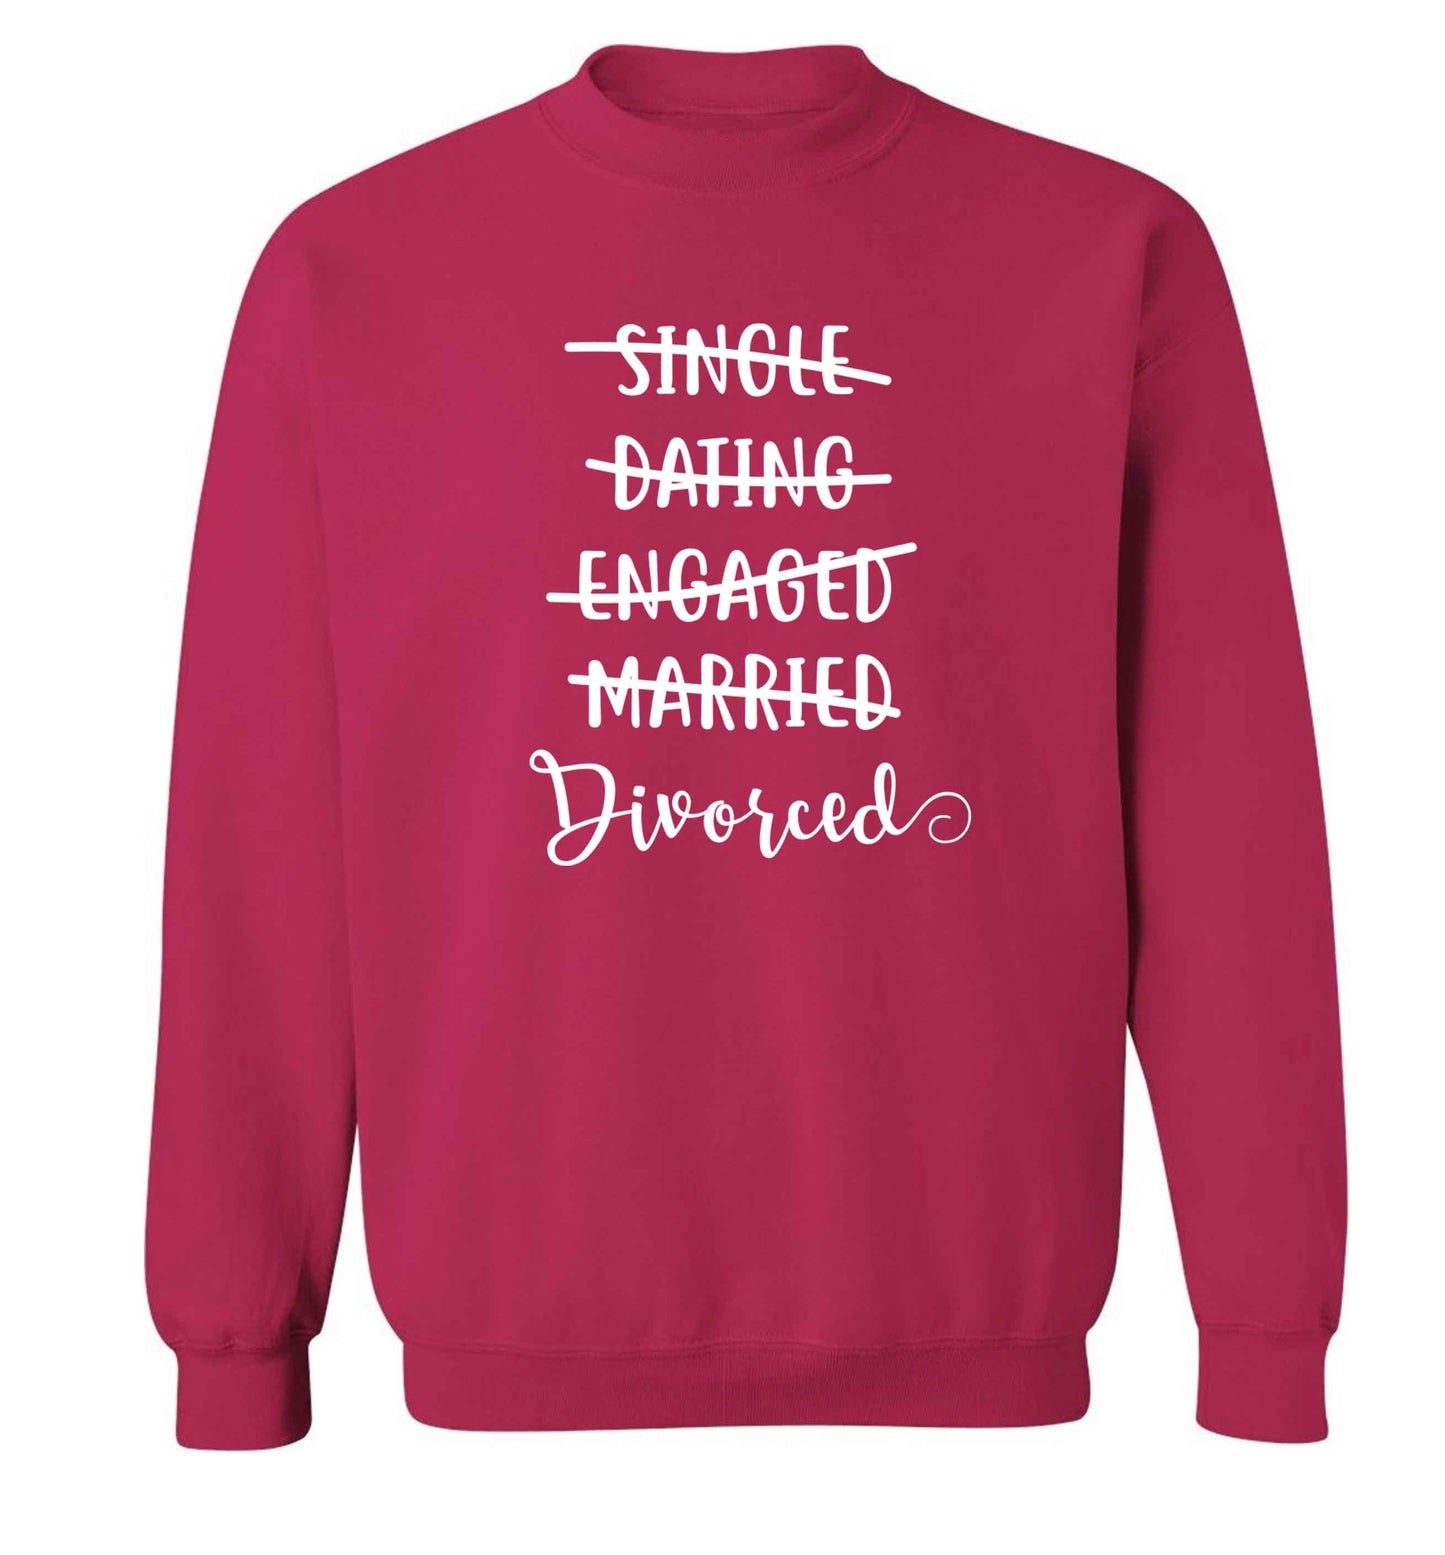 Single, dating, engaged, divorced Adult's unisex pink Sweater 2XL